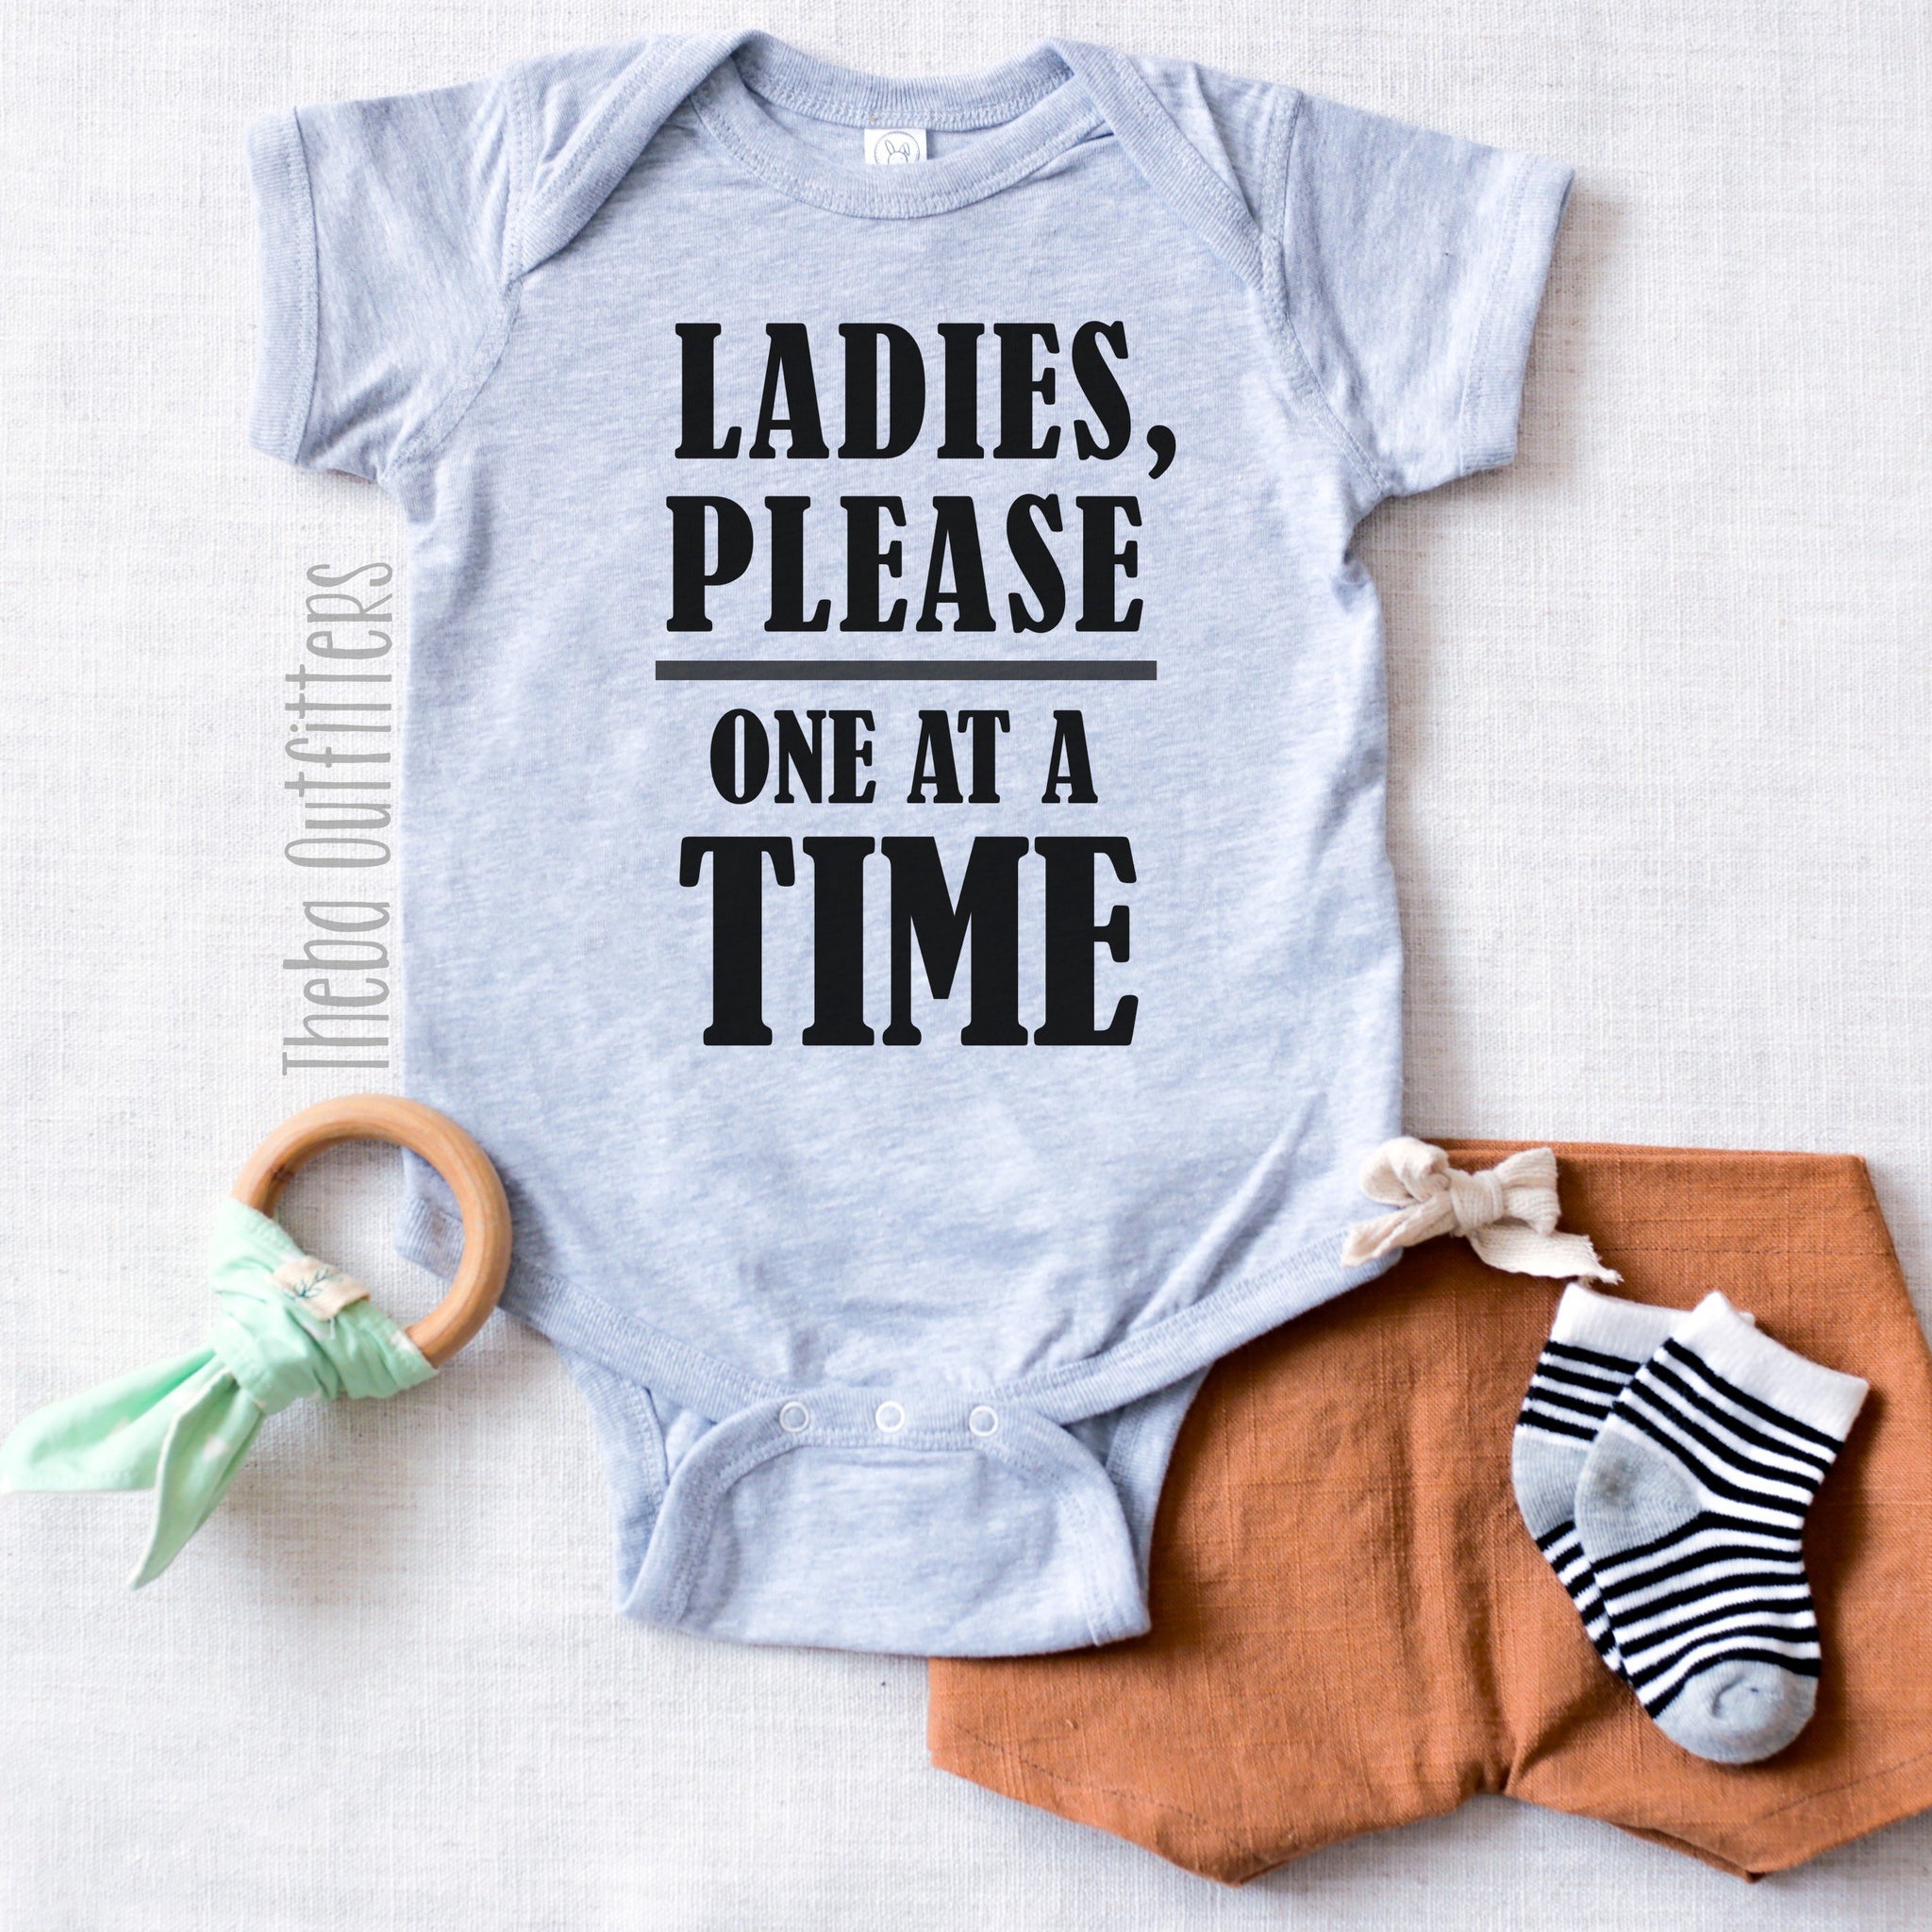 'Ladies Please One at a Time' Onesie Bodysuit Baby Infant Theba Outfitters